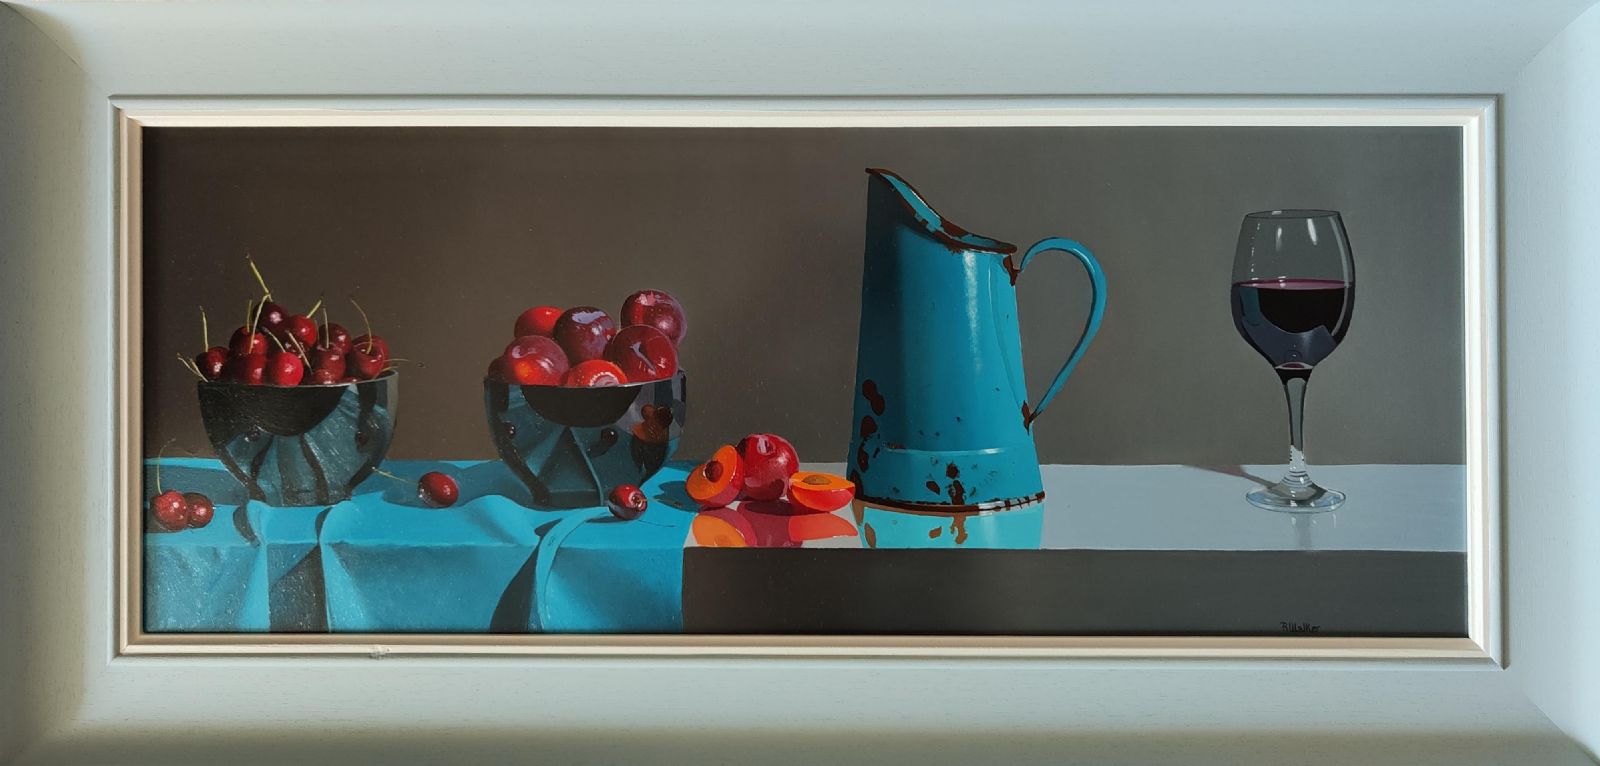 Turquoise Jug with Cherries, Plums, and Wine